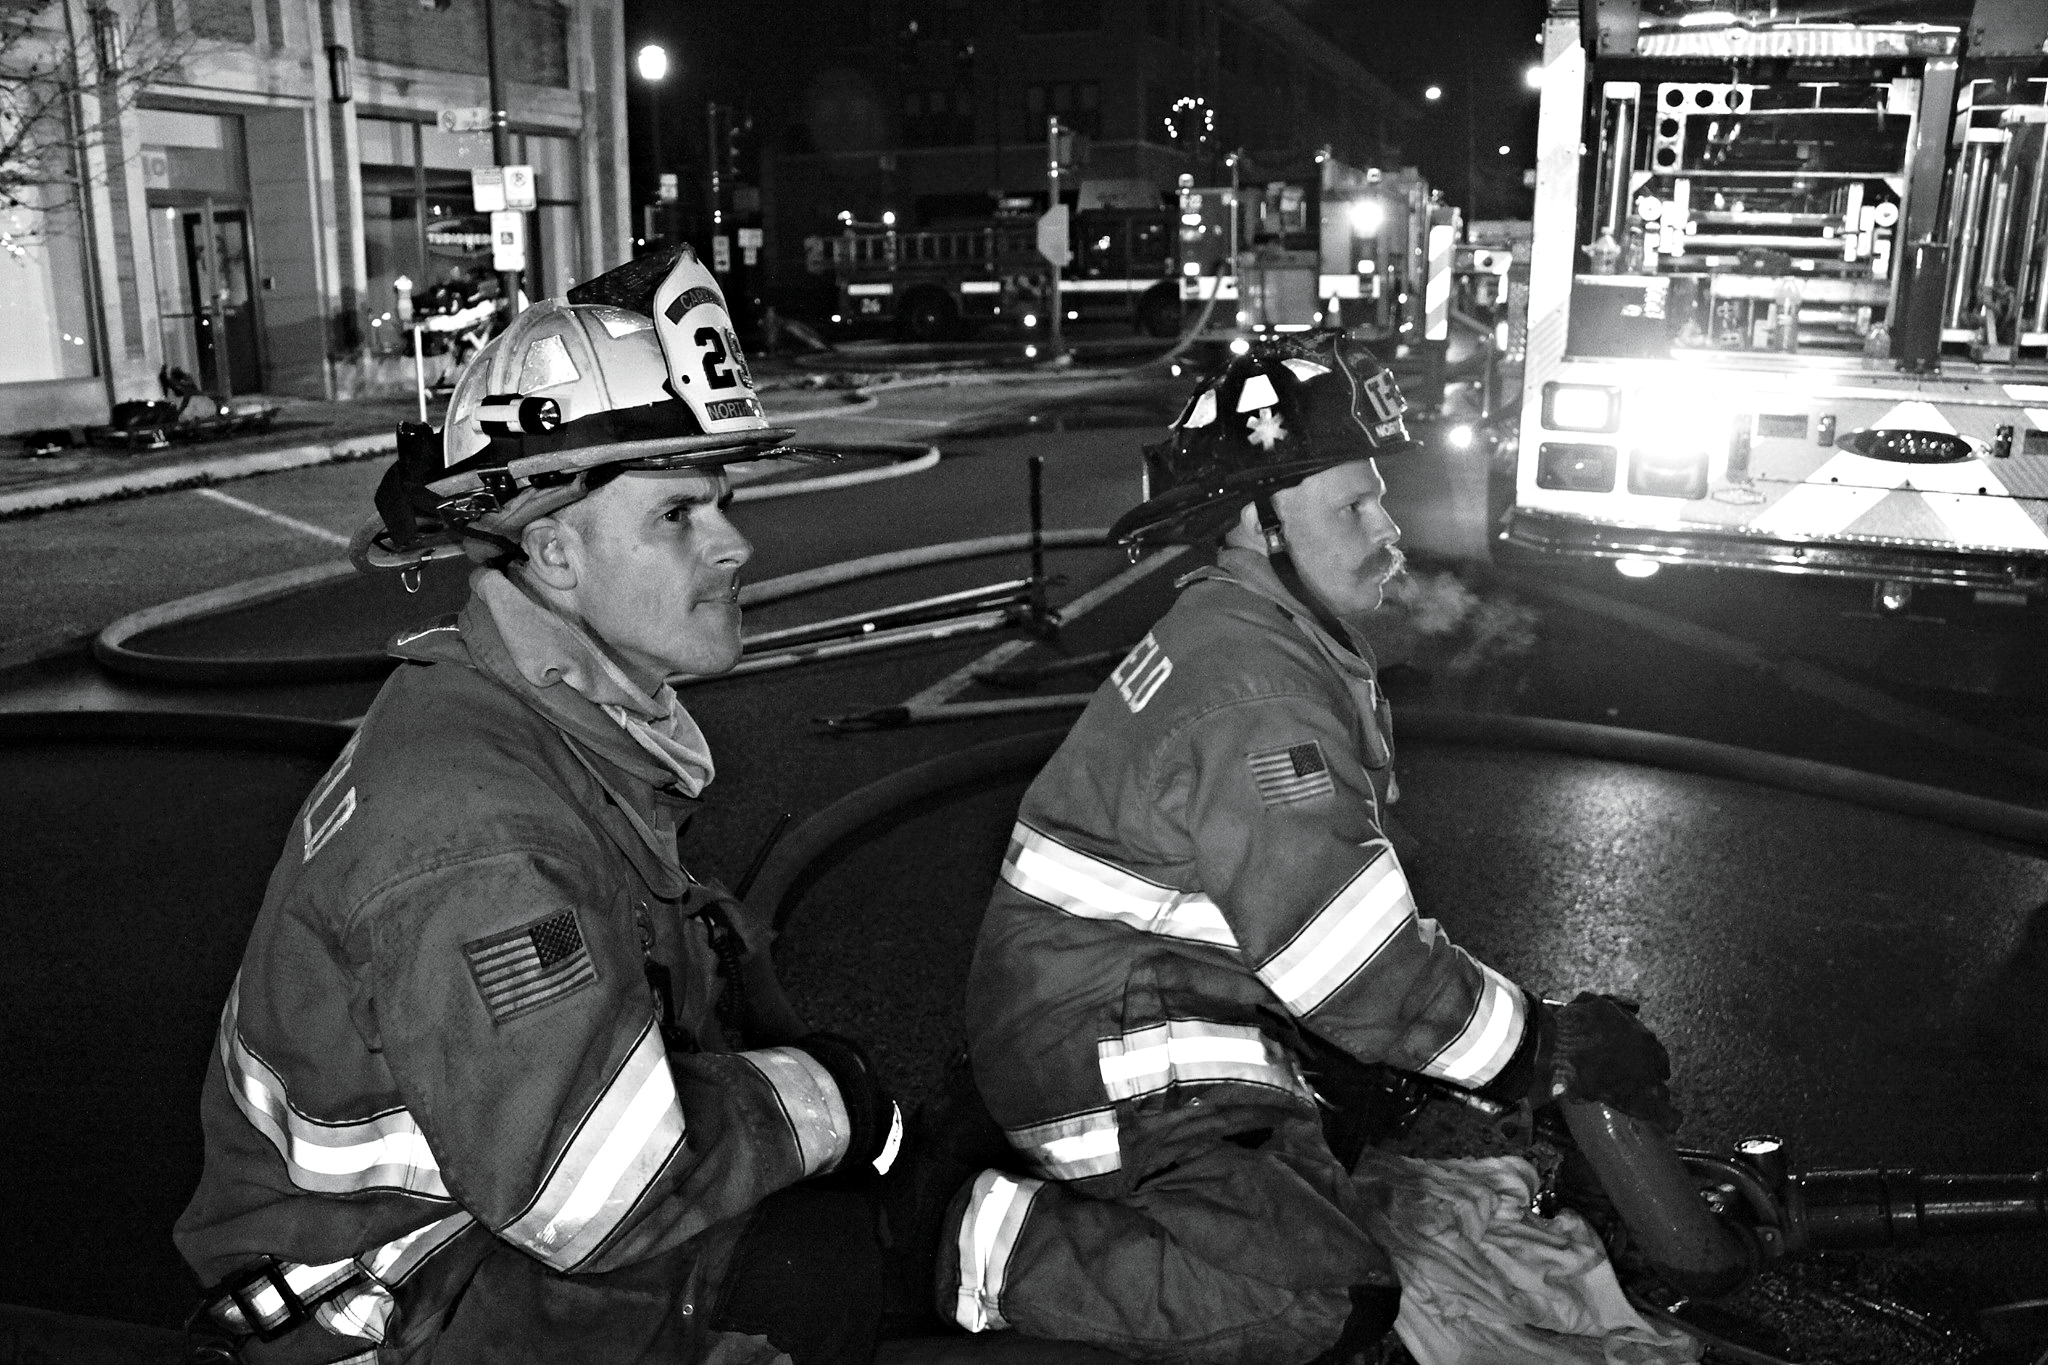 firefighters photo gallery